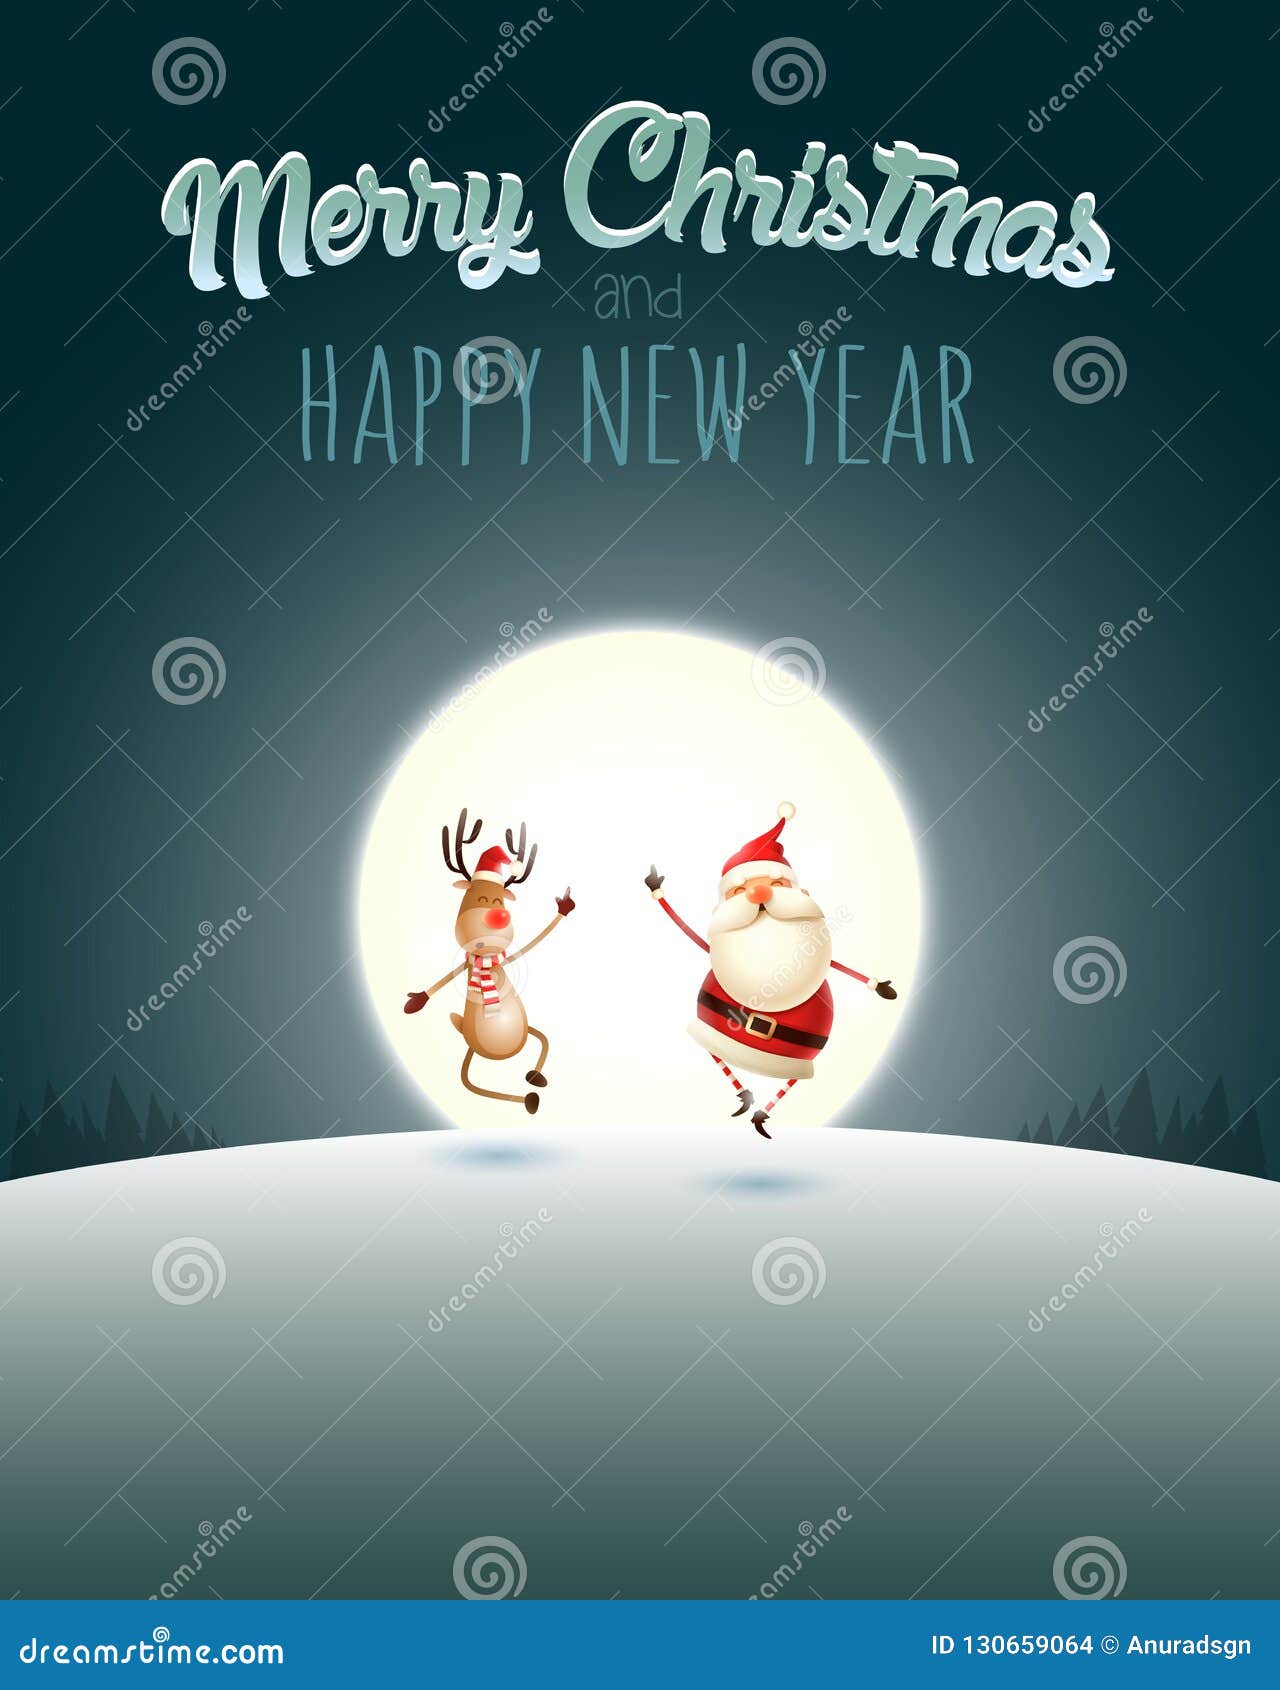 merry christmas and happy new year - happy expresion of santa claus and reindeer - winter landscape with blue moonlight